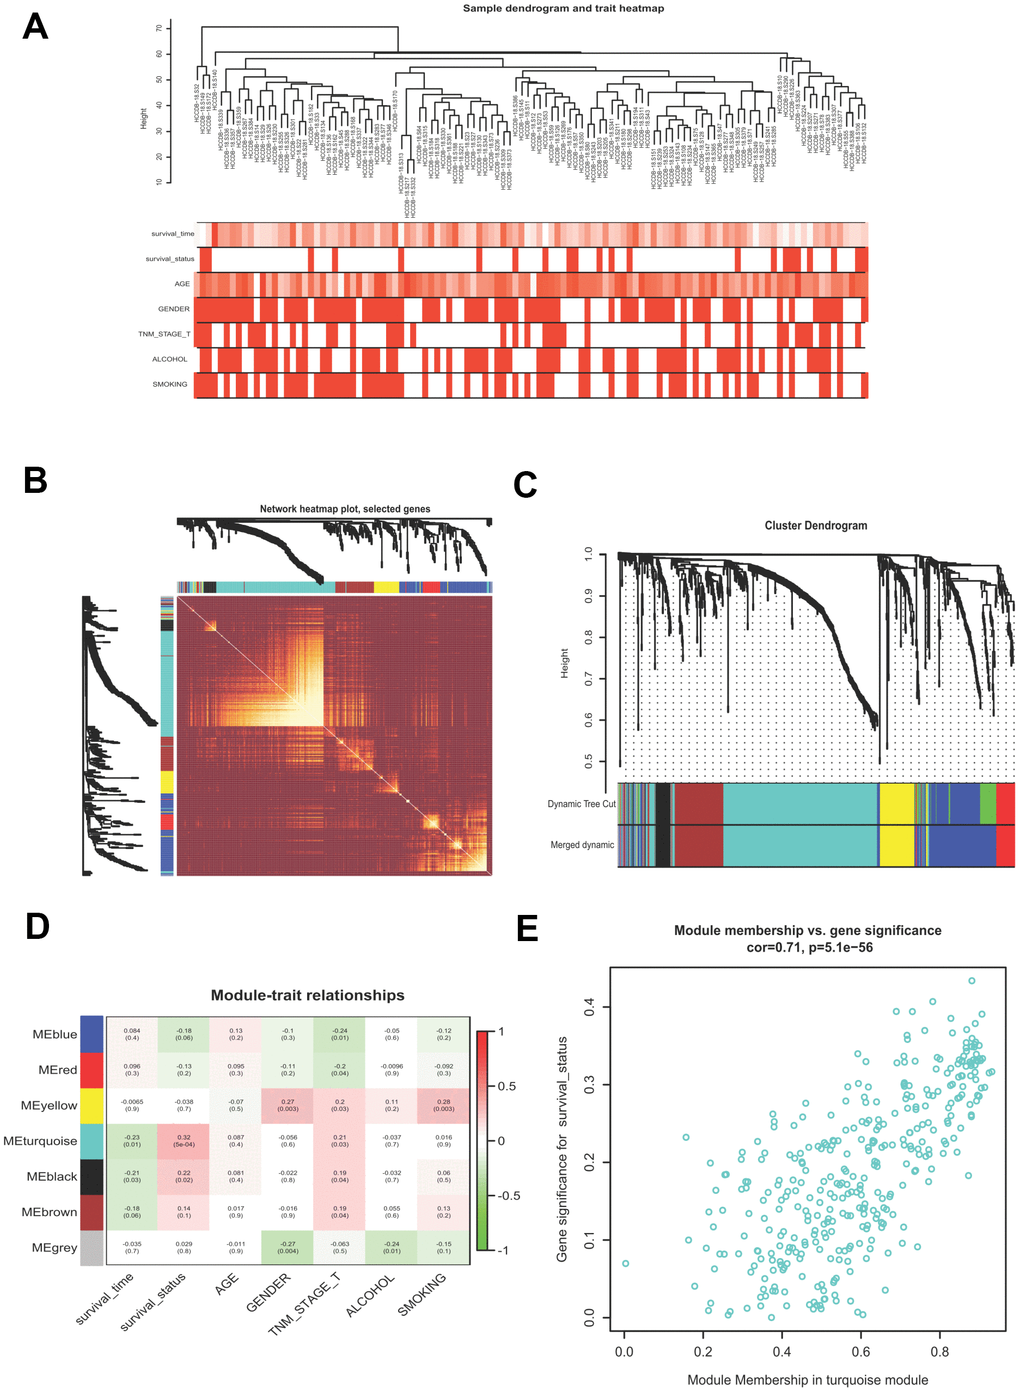 Building a WGCNA network to identify the most significant module correlated with survival status. (A) Sample clustering tree with clinical traits. (B) Heatmap showing the eigengene networks according to the topological overlap matrix (TOM) based dissimilarity. (C) Gene clustering dendrogram, with each color corresponding to an individual gene module. (D) Pearson correlation analysis between module eigengenes and clinical traits. (E) scatter plot showing the gene significance (GS) vs module membership (MM) for the turquoise module. WGCNA, Weight Gene Co-expression Network Analysis.